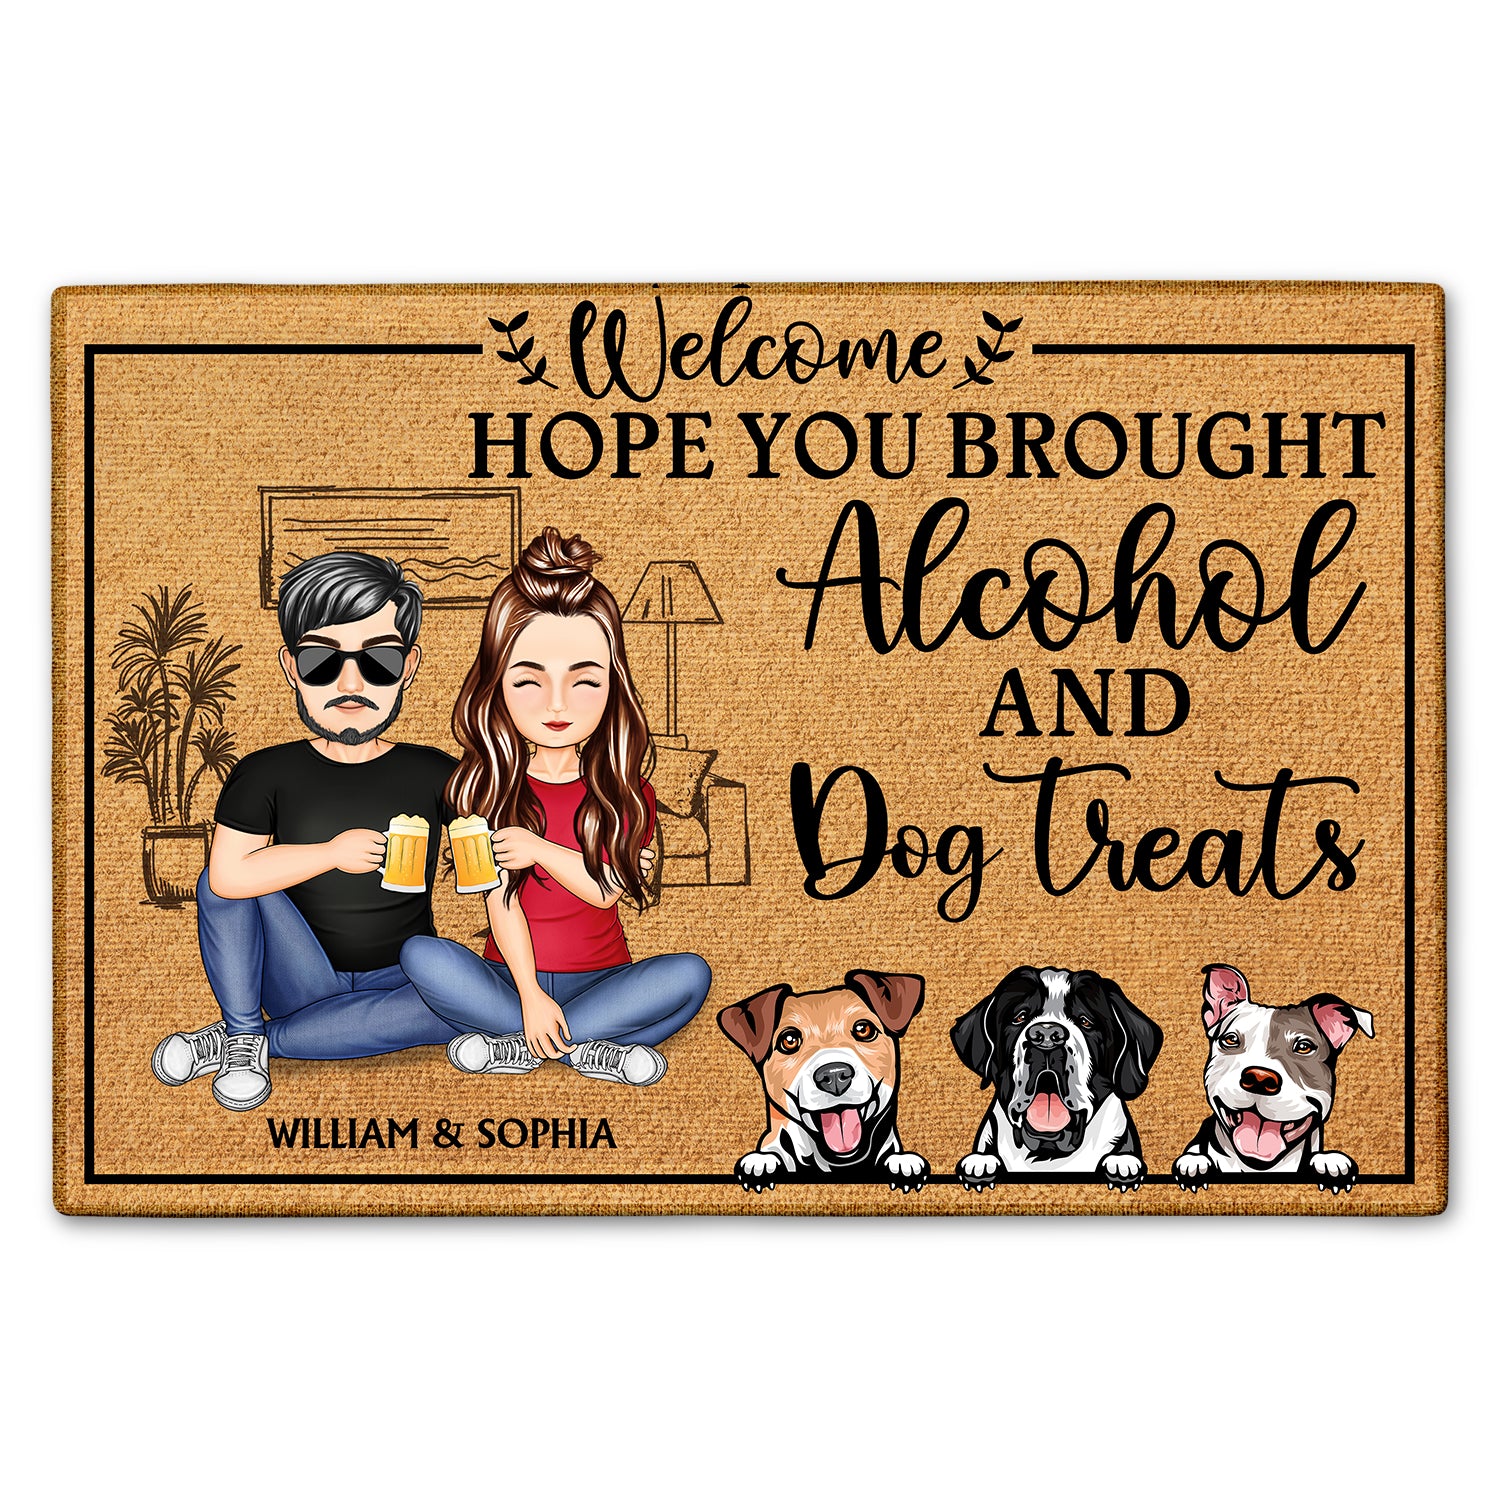 Hope You Brought Alcohol And Dog Cat Treats - Gift For Family, Couple, Pet Lovers - Personalized Custom Doormat